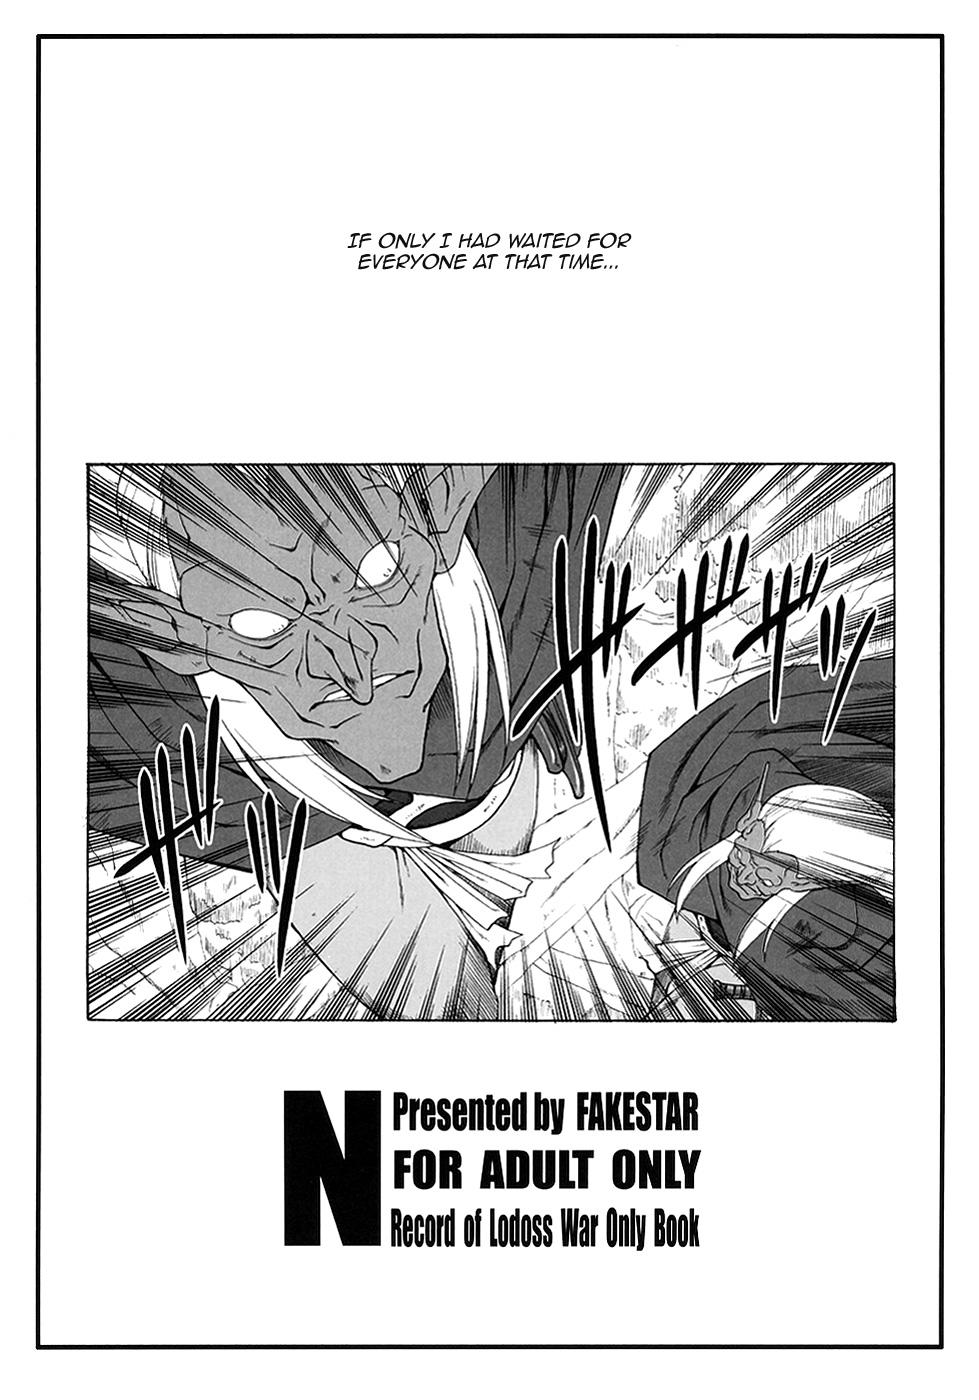 Ink N - Record of lodoss war Thief - Page 2